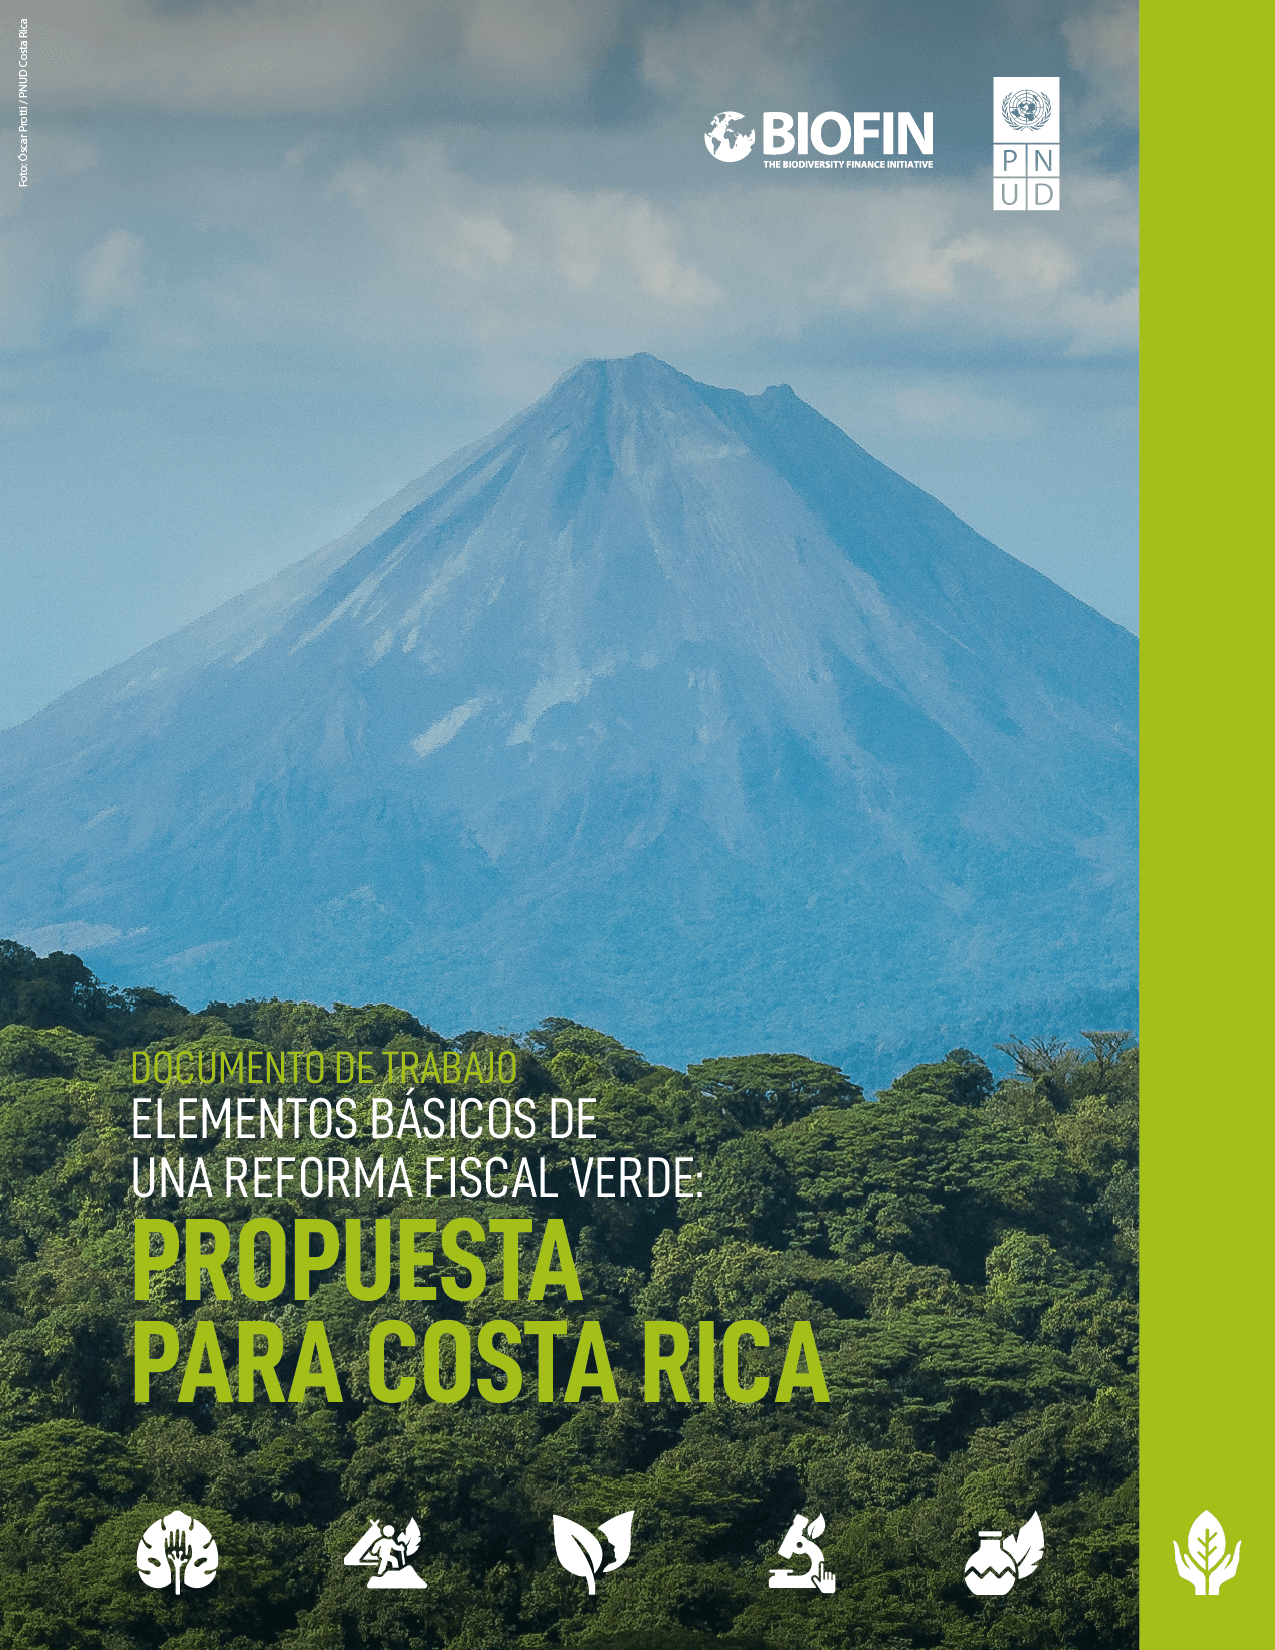 BASIC ELEMENTS OF A GREEN TAX REFORM: PROPOSAL FOR COSTA RICA